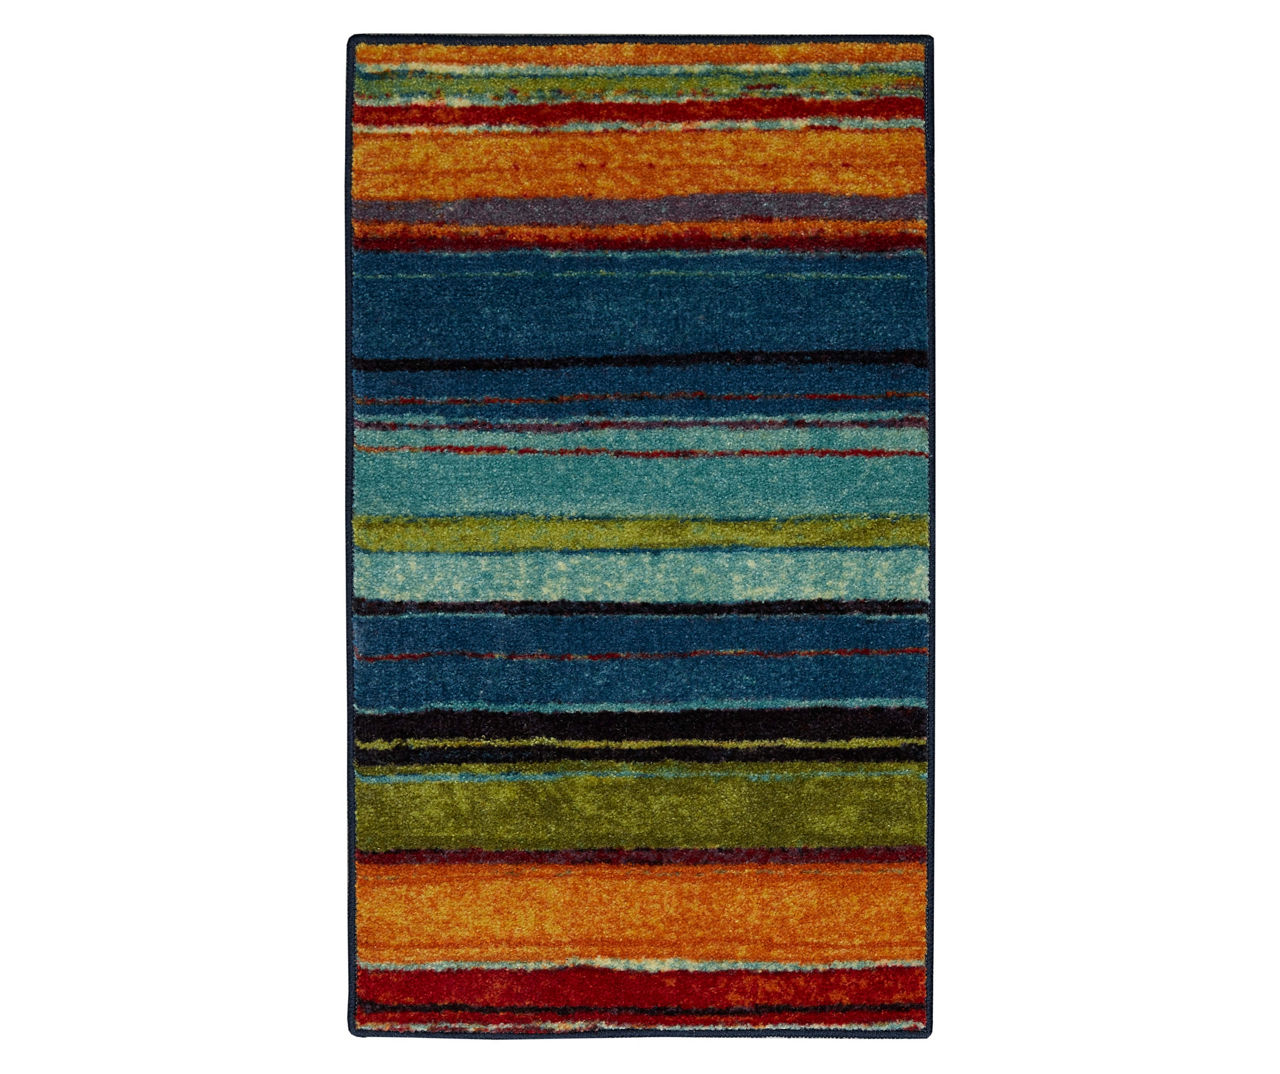 Maxy Home Rubber Backed Runner Rug, 22 x 60 inch (5 ft Runner), Multicolor  Striped, Non Slip, Kitchen Rugs and Mats